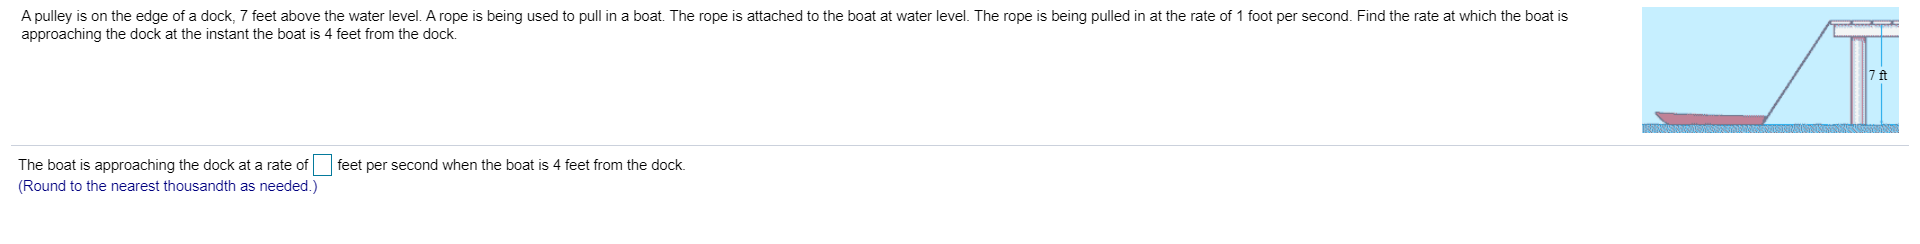 A pulley is on the edge of a dock, 7 feet above the water level. A rope is being used to pull in a boat. The rope is attached to the boat at water level. The rope is being pulled in at the rate of 1 foot per second. Find the rate at which the boat is
approaching the dock at the instant the boat is 4 feet from the dock
7 ft
feet per second when the boat is 4 feet from the dock
The boat is approaching the dock at a rate of
(Round to the nearest thousandth as needed.)
